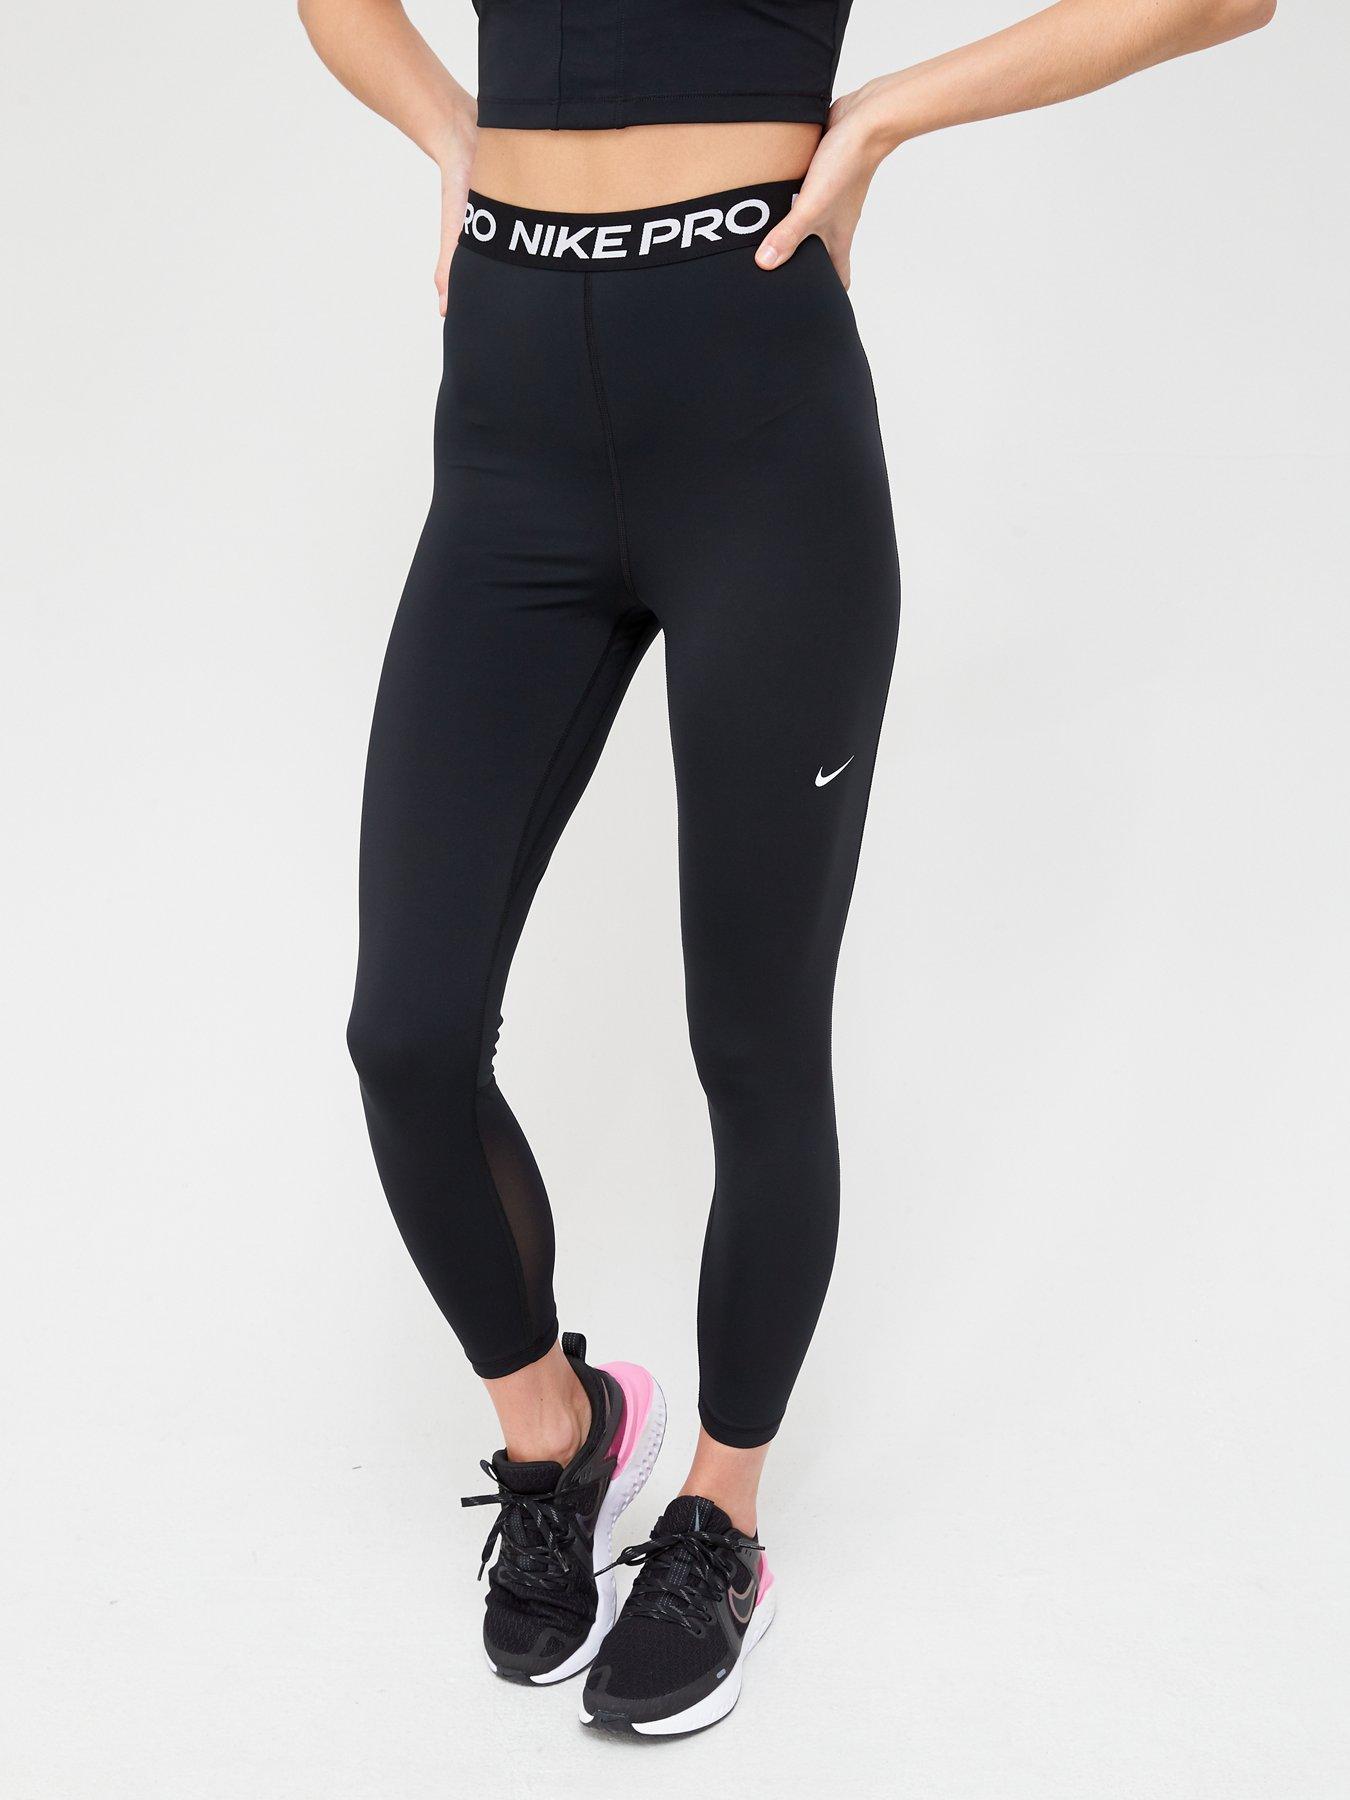 Nike Mid-rise Tights (Just Do It) - Size XL, Women's Fashion, Activewear on  Carousell